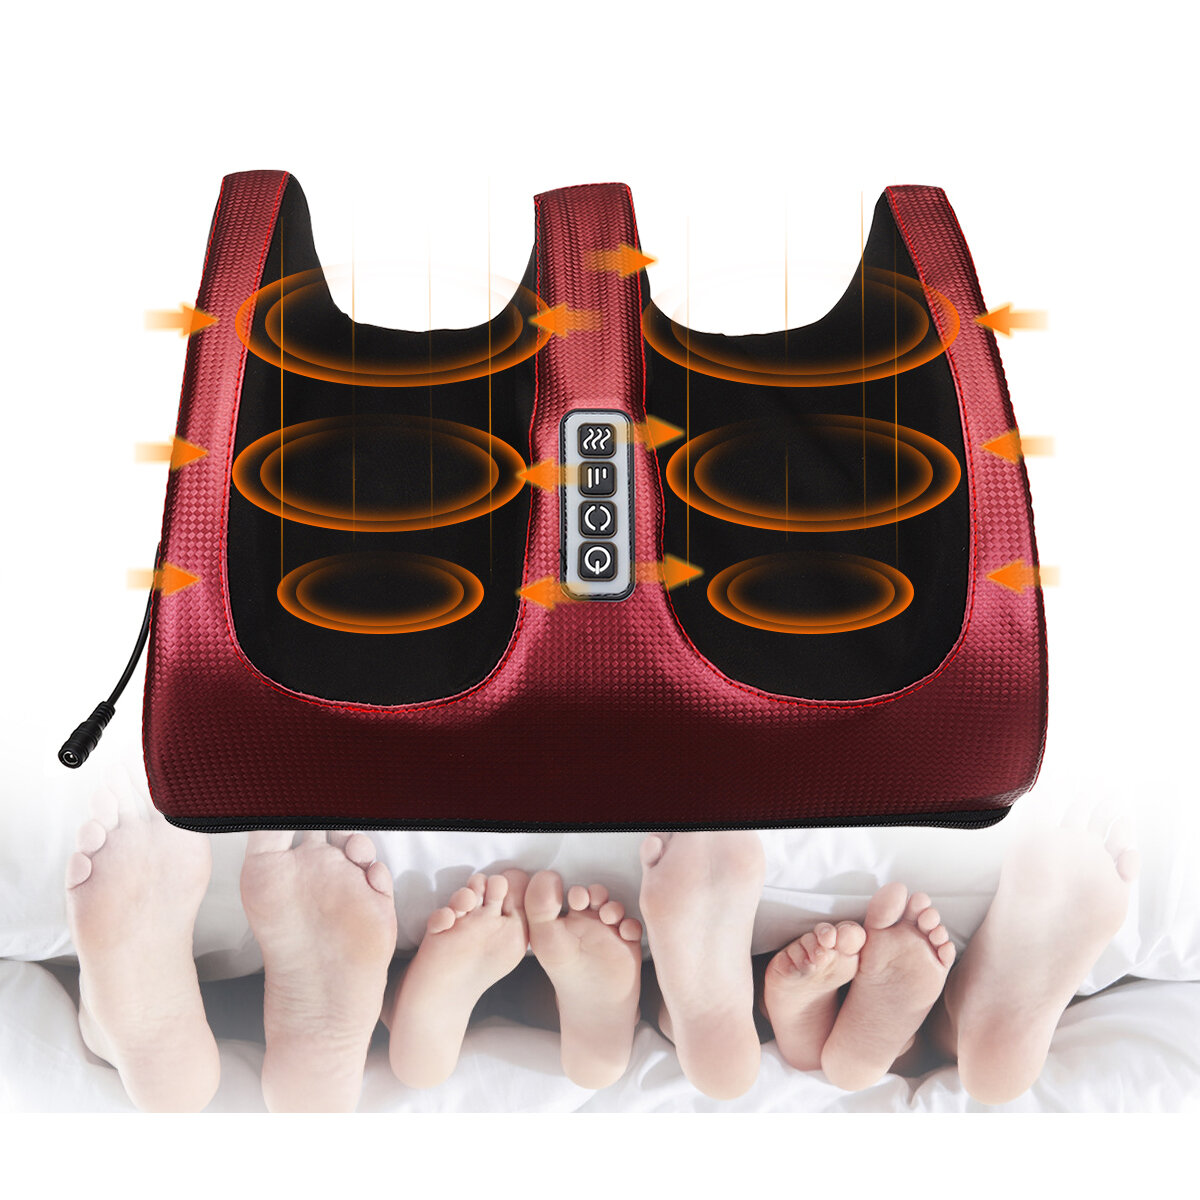 24W 6 in 1 Electric Foot Massager Sports Fitness Relaxing Household Foot  Leg Cal Sale - Banggood USA-arrival notice-arrival notice